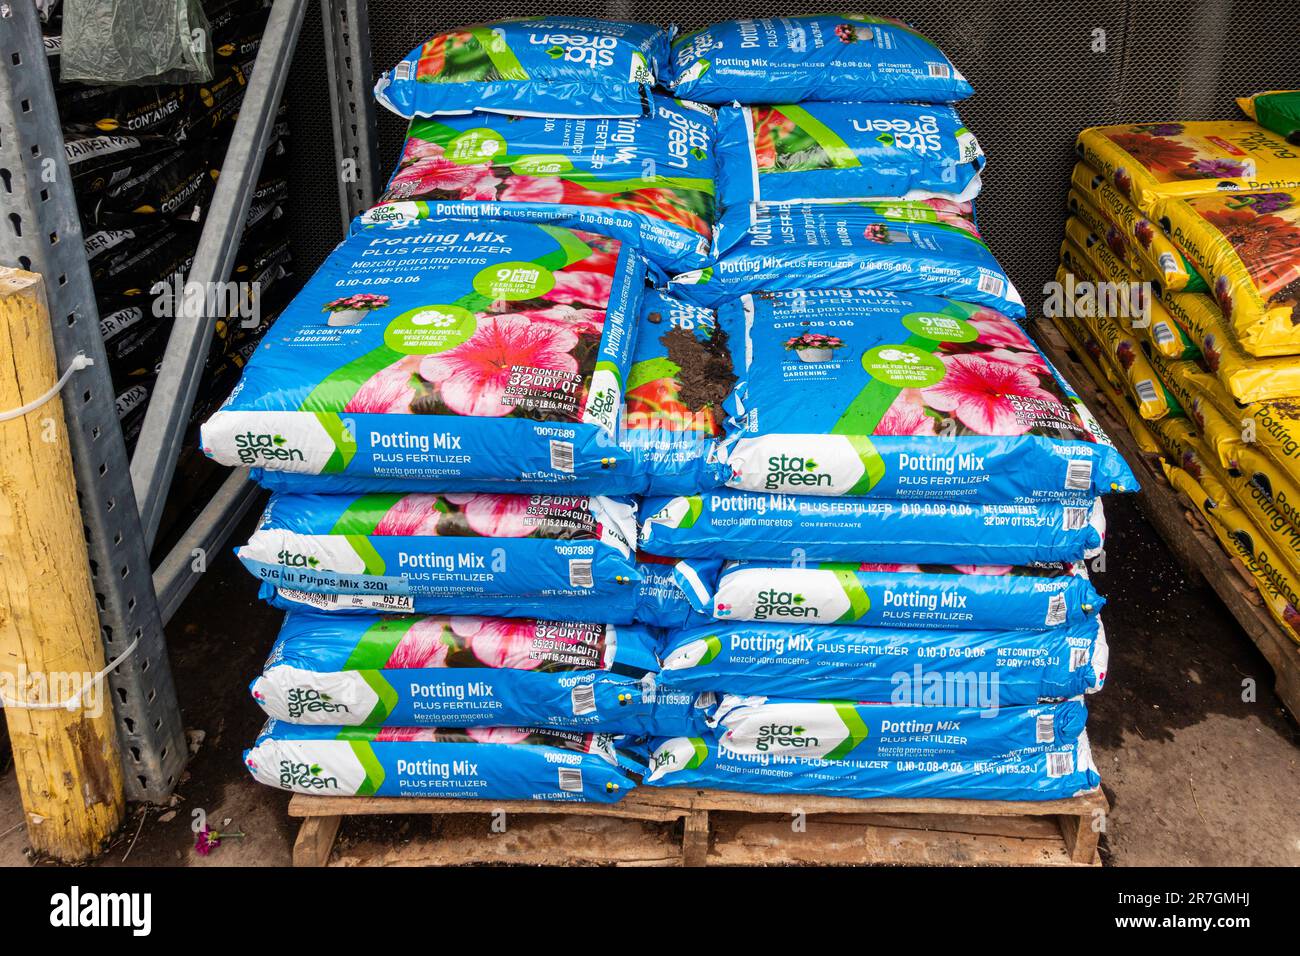 Stacked bags of potting mix with fertilizer, sta-green brand, for sale at a garden center in Wichita, Kansas, USA. Stock Photo